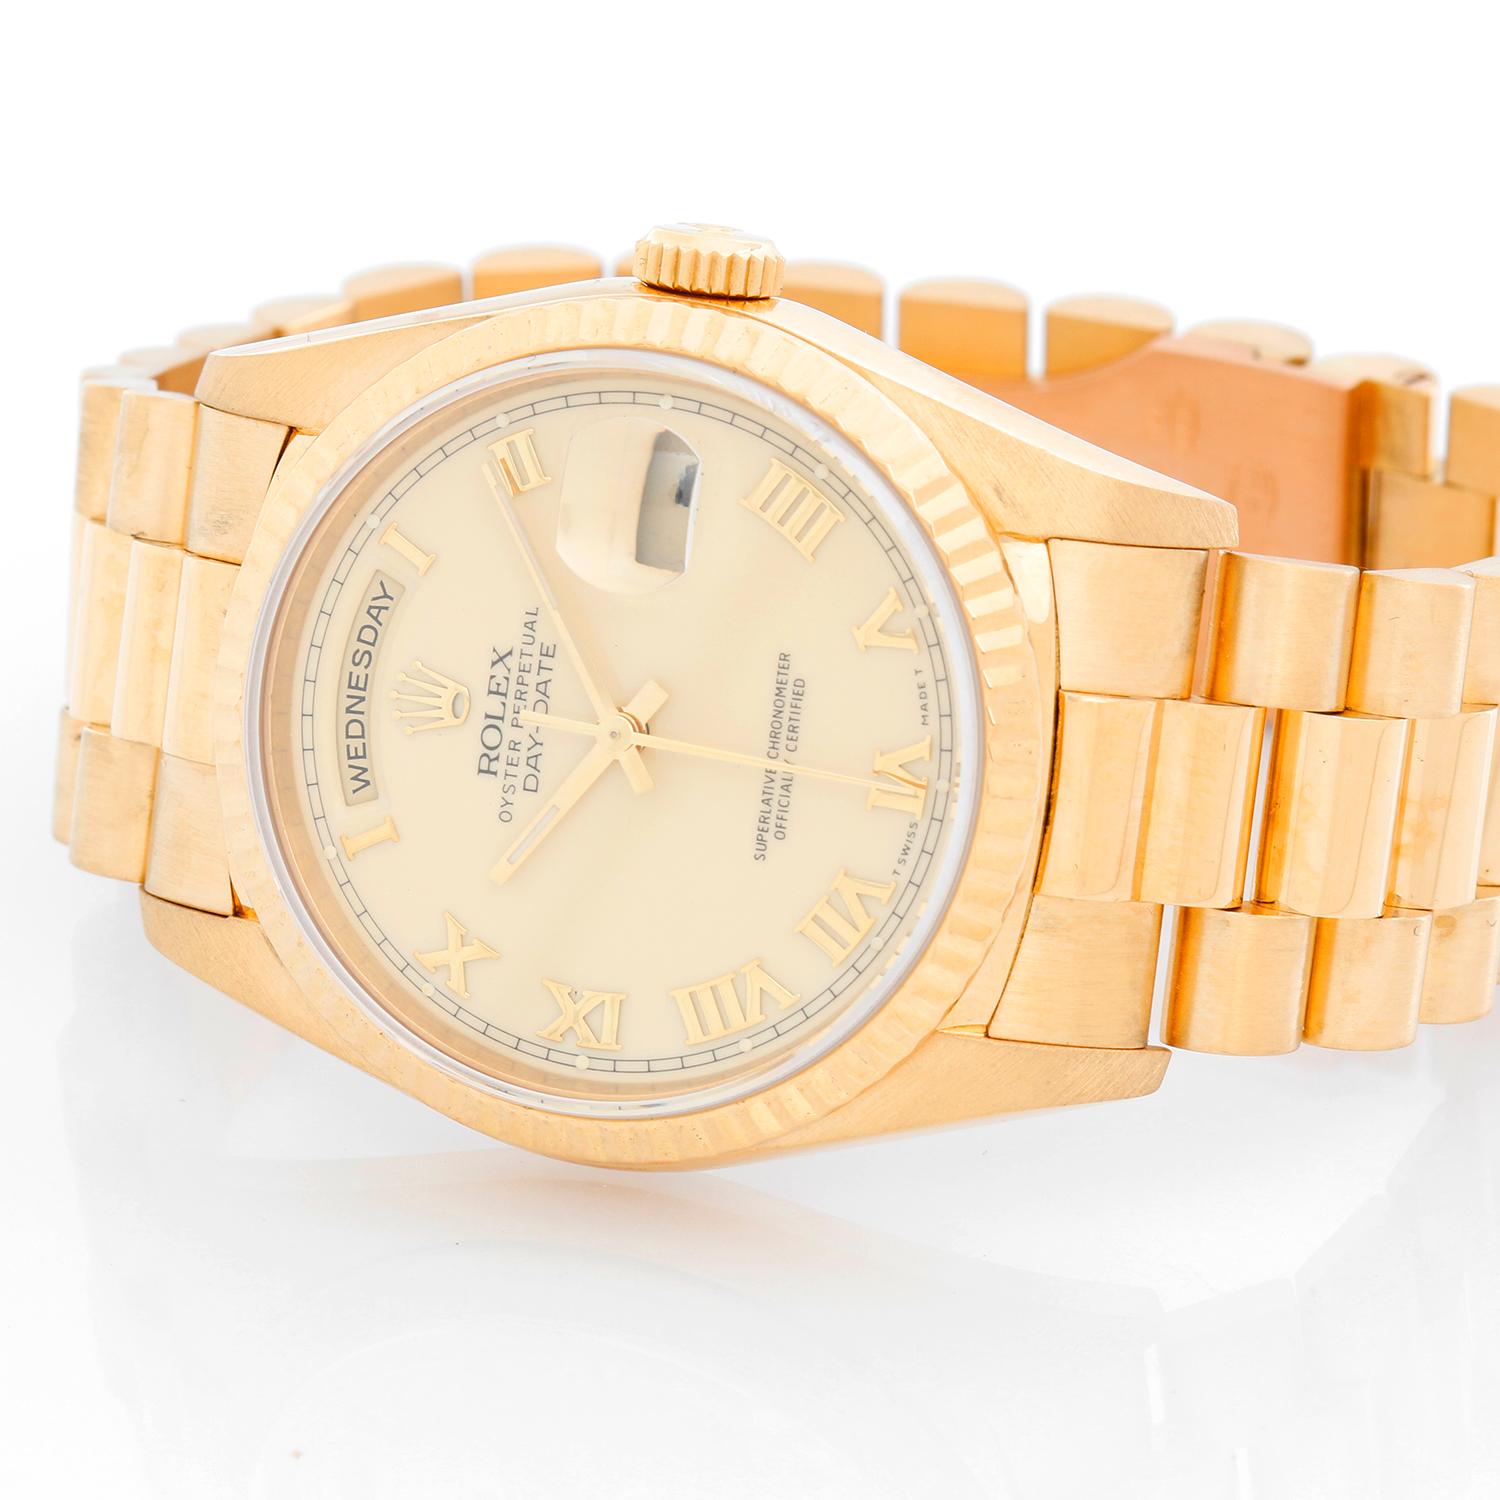 Men's Rolex President - Day-Date Watch 18238 - Automatic winding, 31 jewels, Quickset day/date, sapphire crystal. 18k yellow gold case with fluted bezel  (36mm diameter). Creme color dial with Roman numerals. 18K Yellow gold president bracelet .